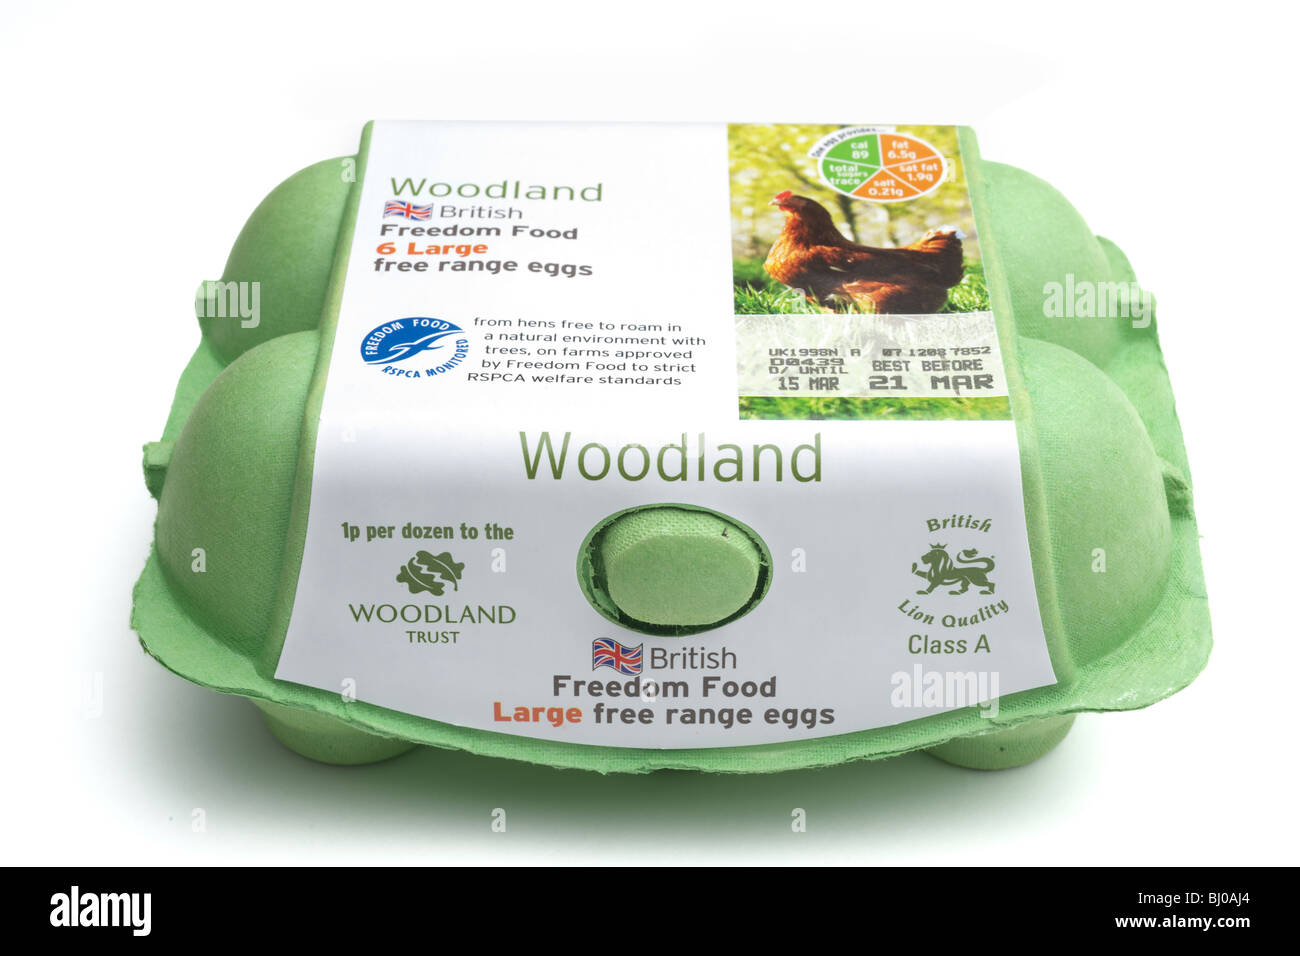 Egg box containing Six class A Woodland British free range eggs in a green polystyrene container Stock Photo